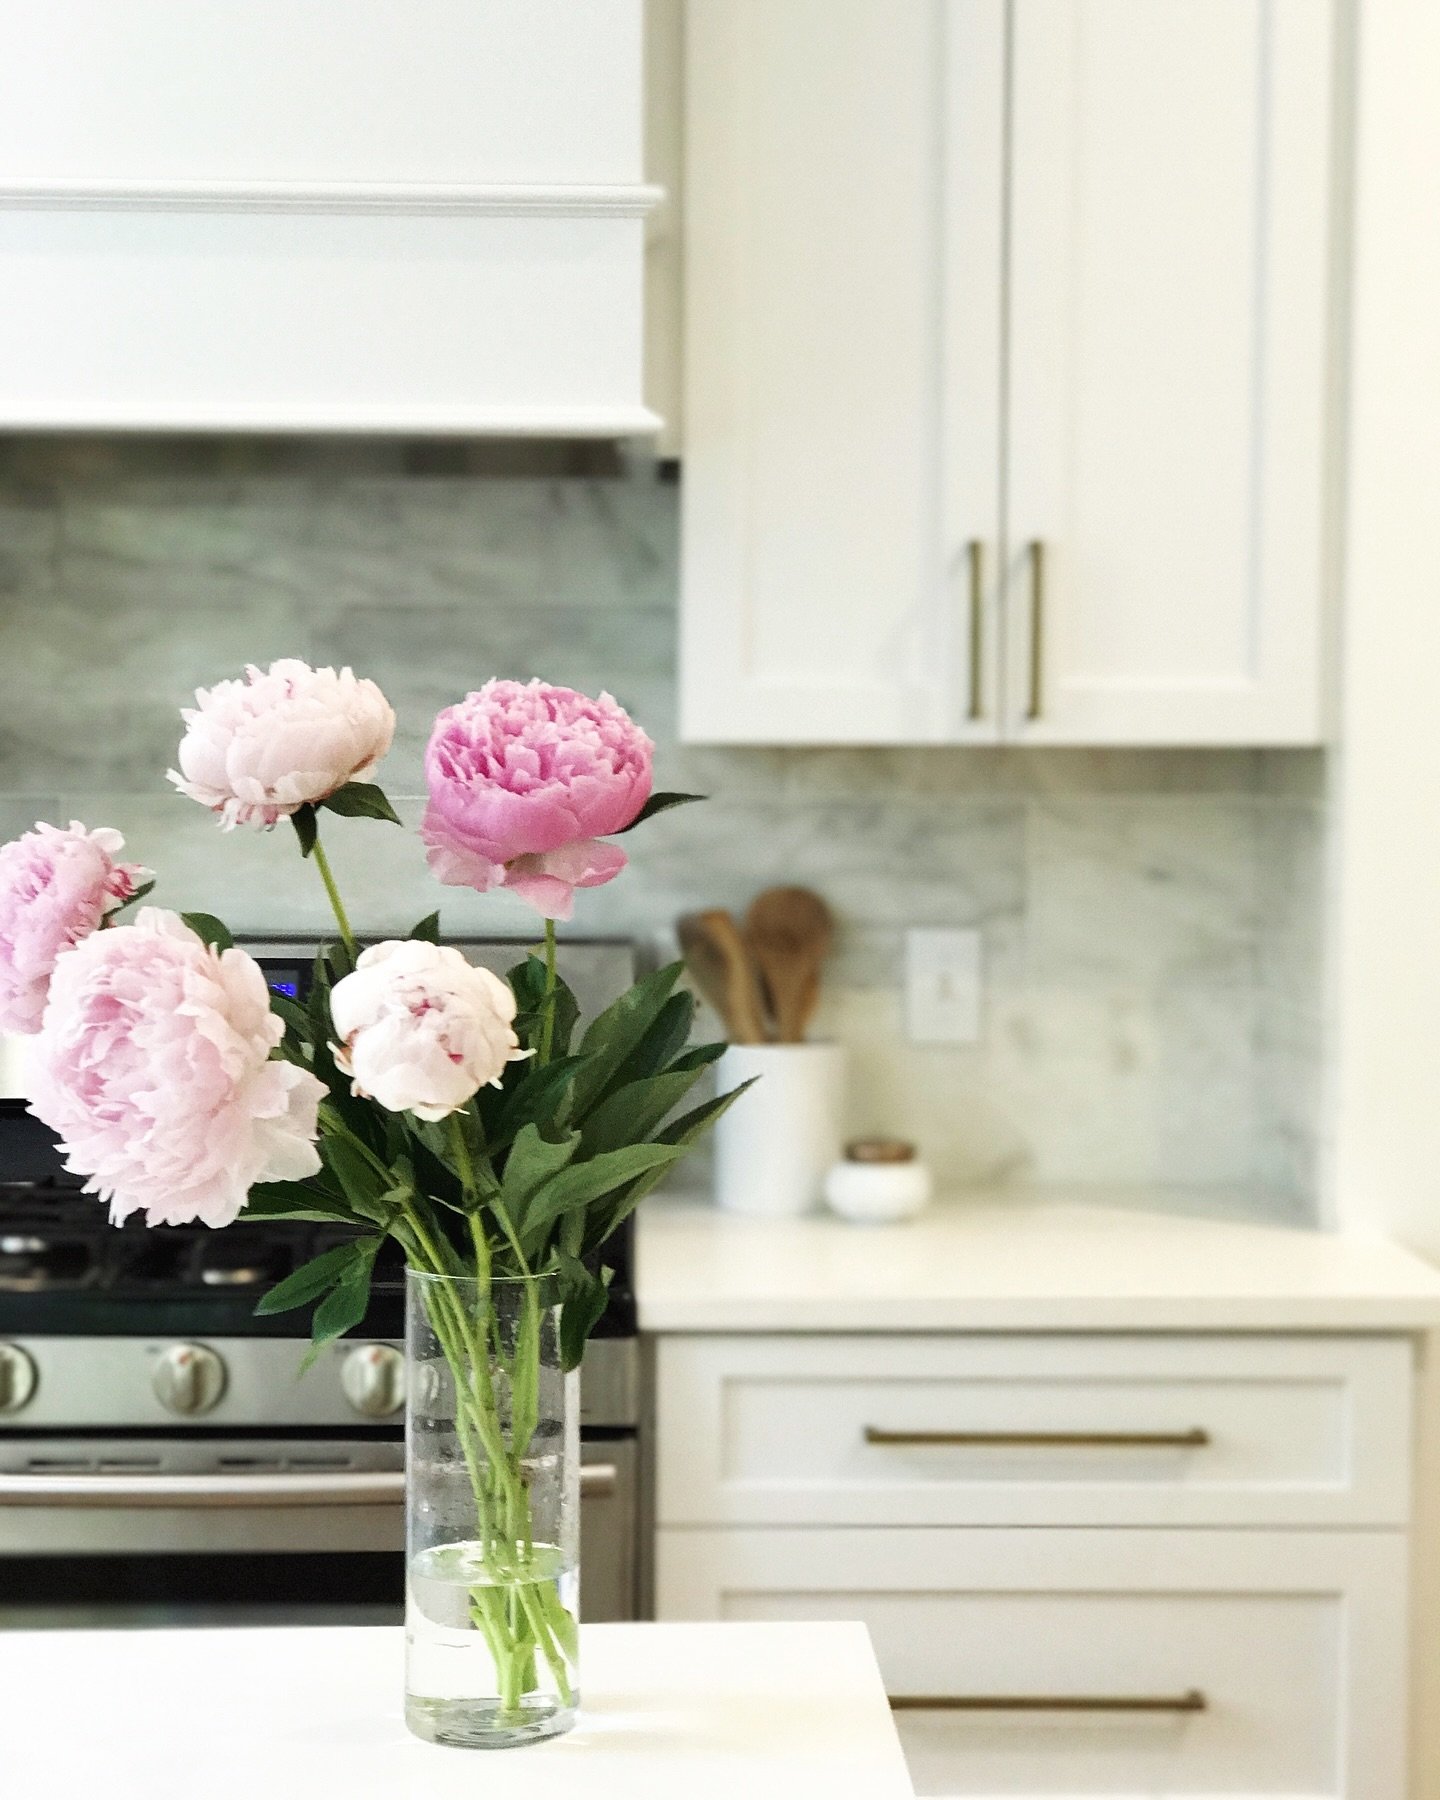 As the warmth of summer draws near, let&rsquo;s invite the vibrant energy of the season into our homes. There&rsquo;s nothing quite like the elegance of fresh blooms to elevate your space. The delicate scent of pink peonies against the backdrop of th